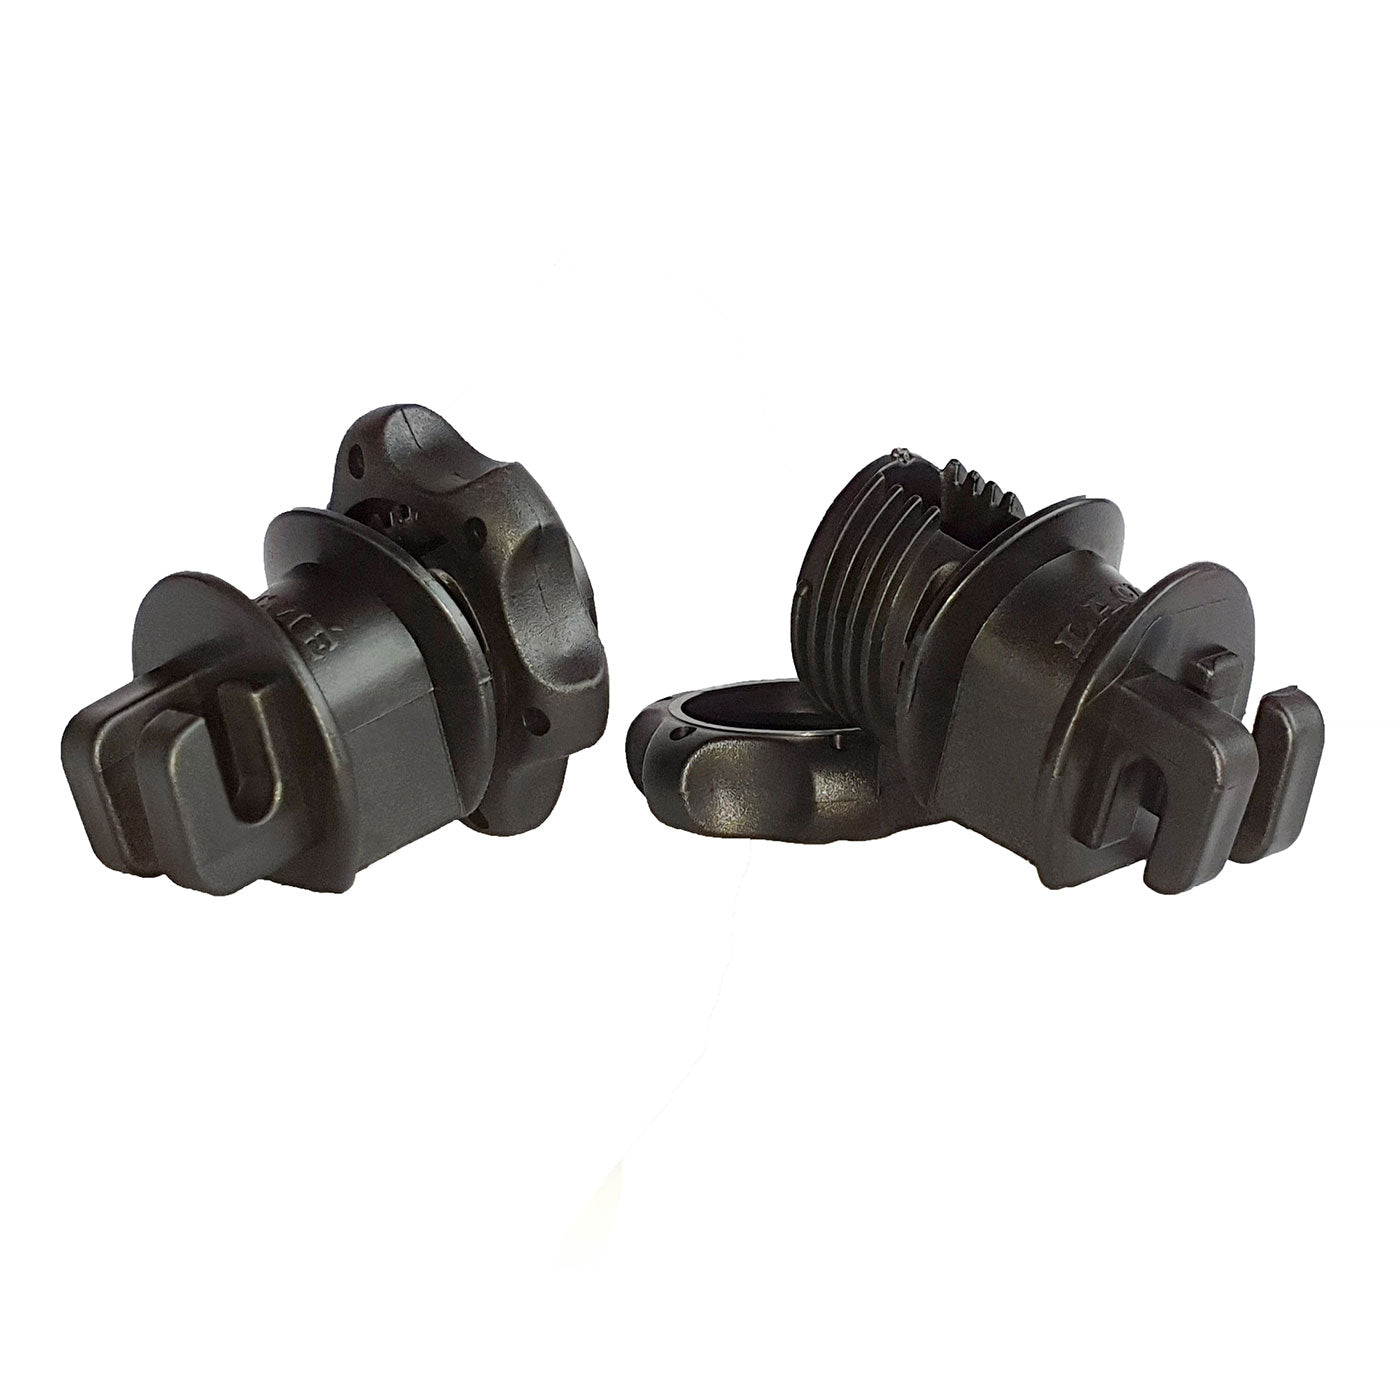 Adjustable Insulator for wire and tape (D8-12)